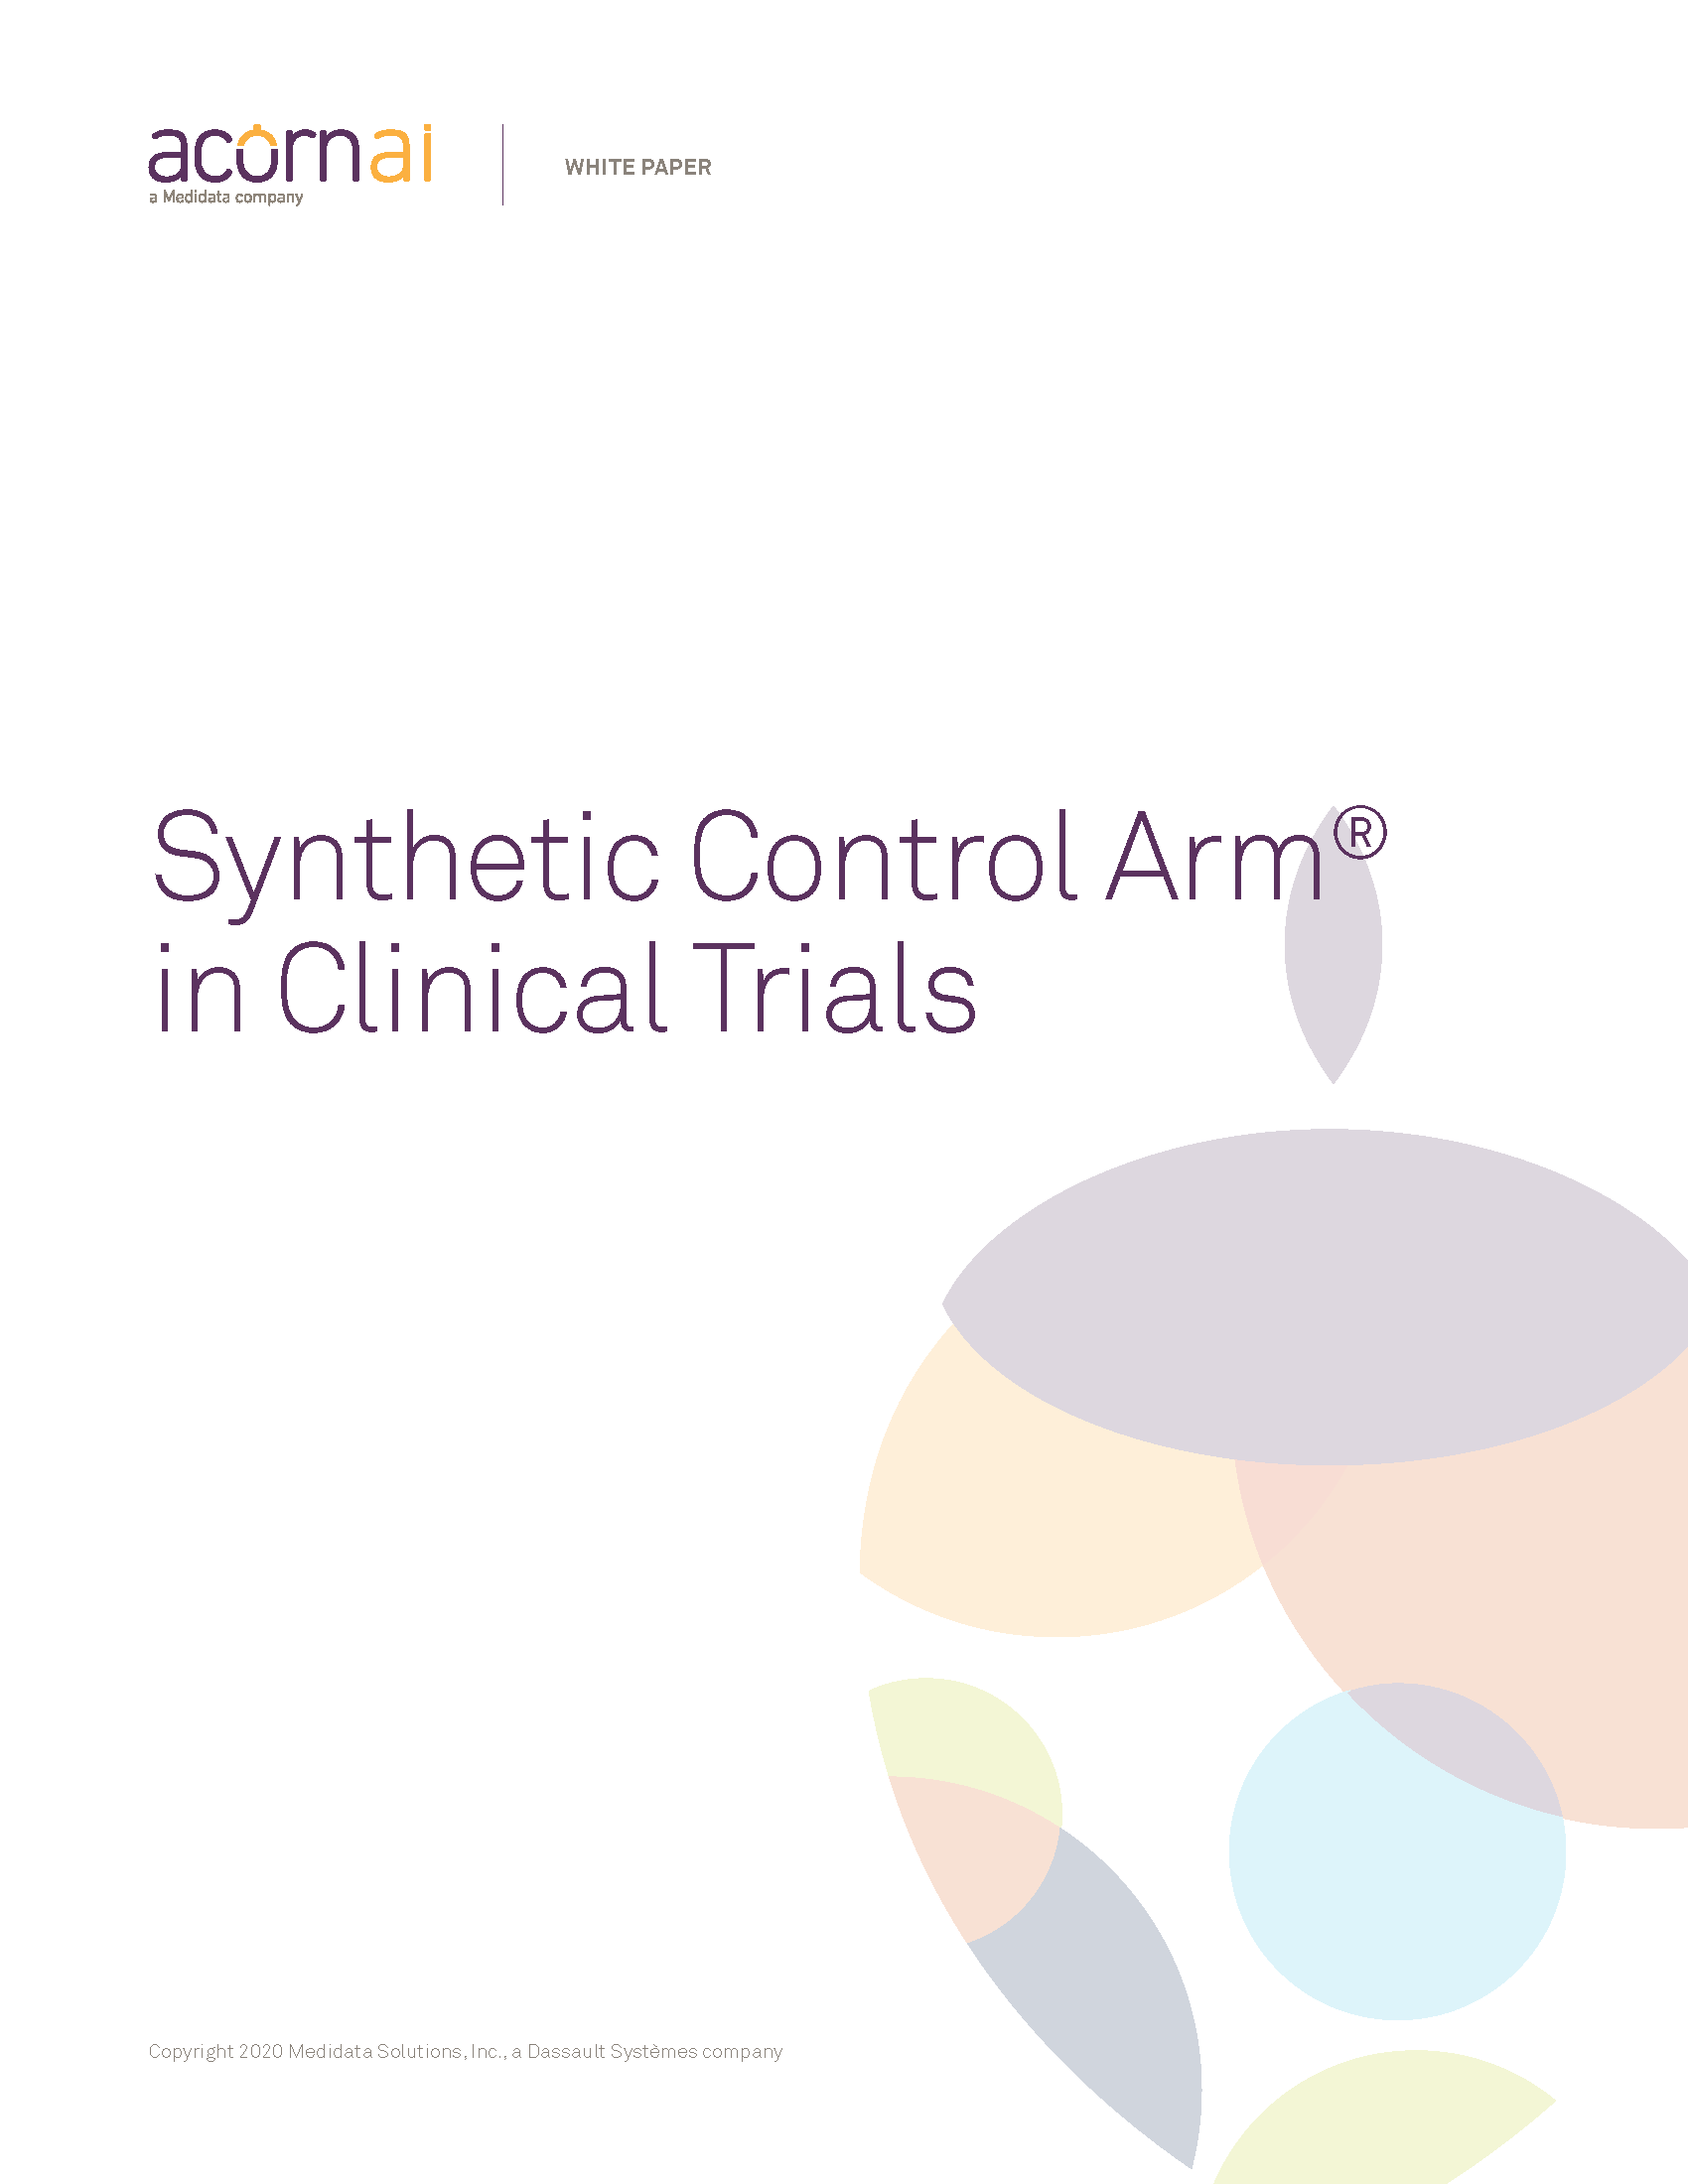 Synthetic Control Arm in Clinical Trials